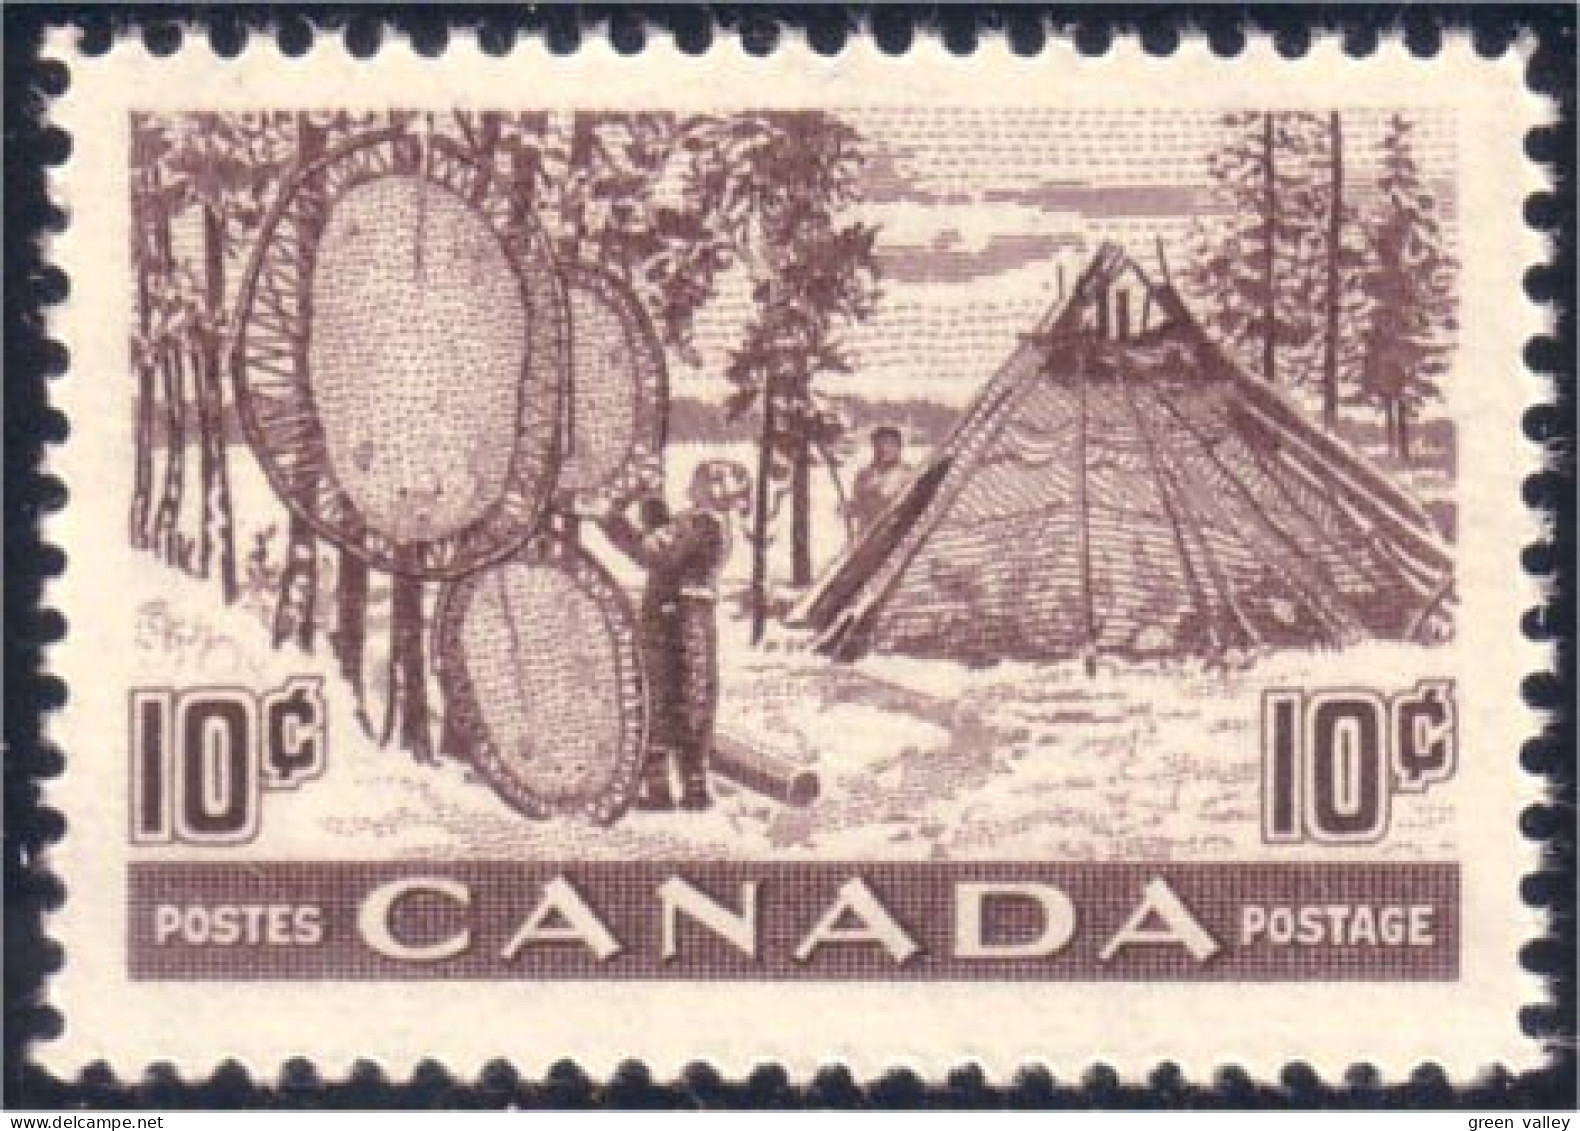 Canada Drying Skins Sechage Des Peaux MNH ** Neuf SC (03-01a) - Nuevos